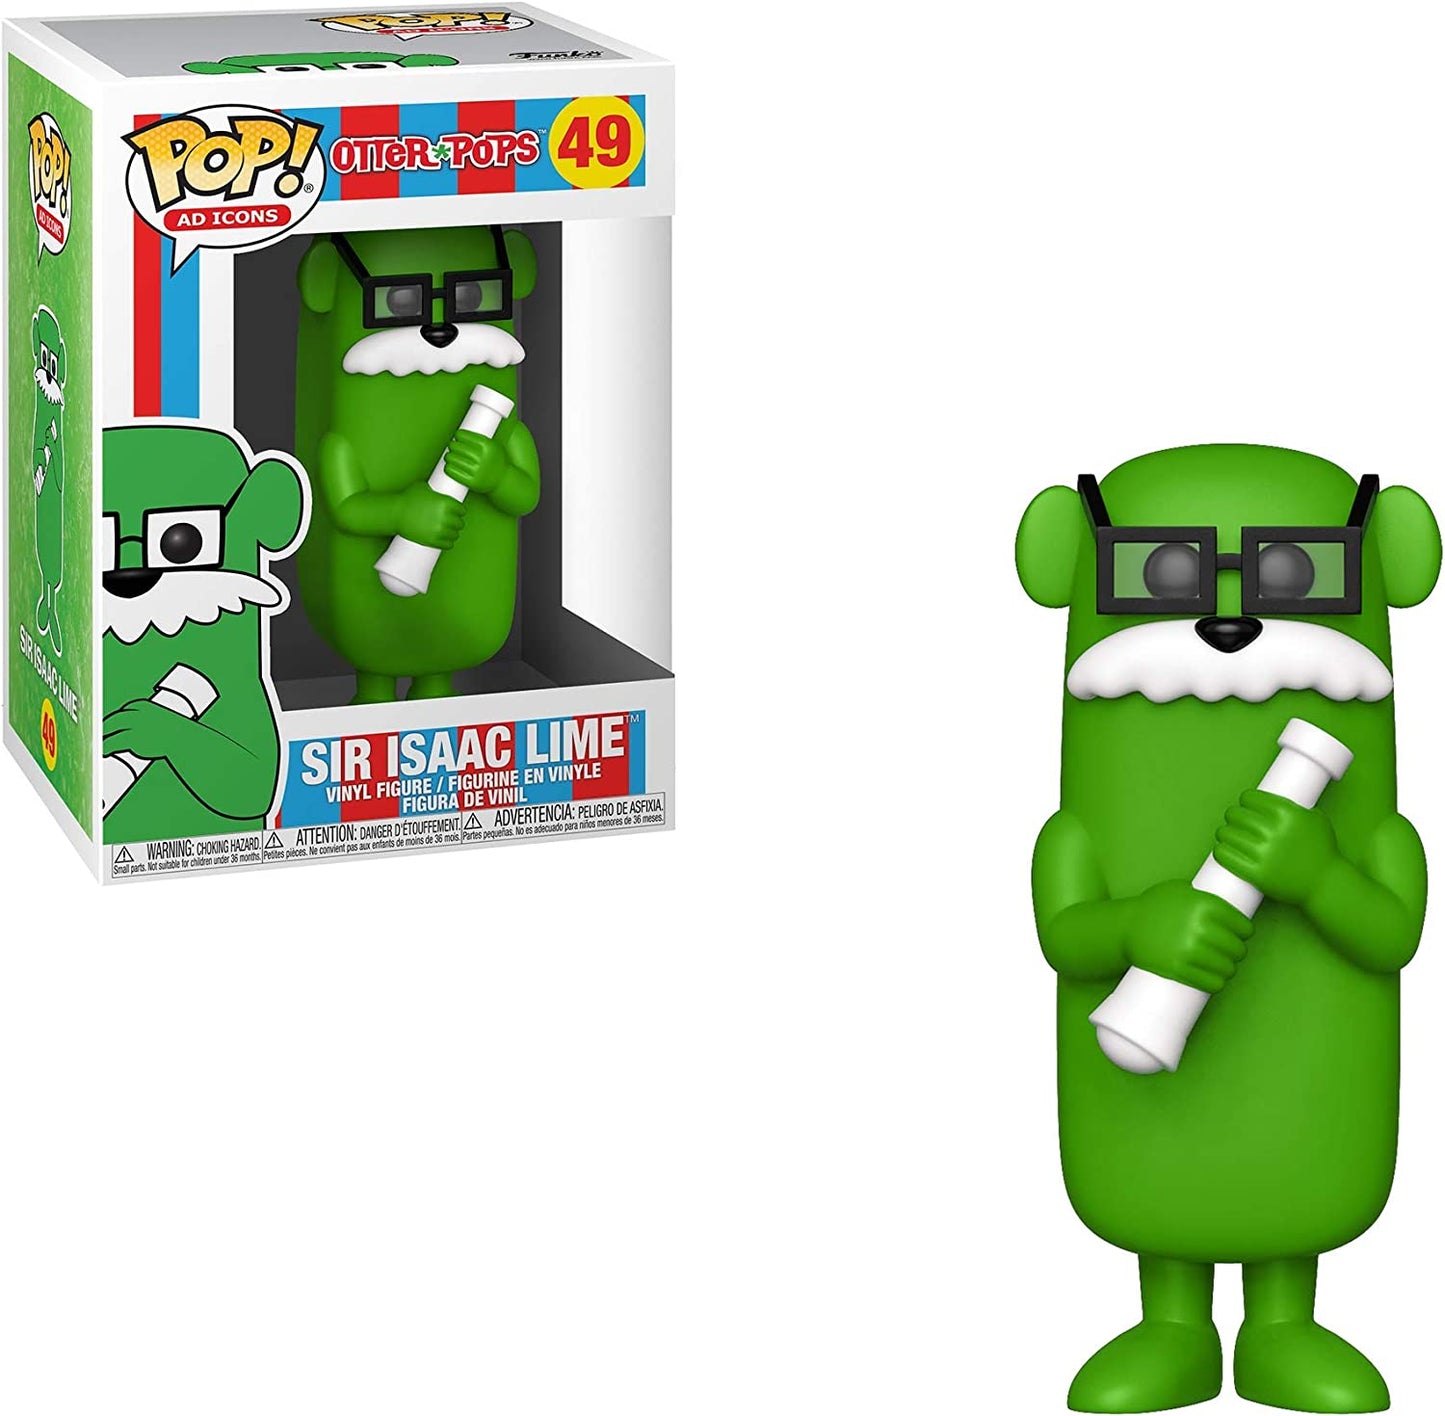 OTTER POPS: SIR ISAAC LIME #49 - FUNKO POP!